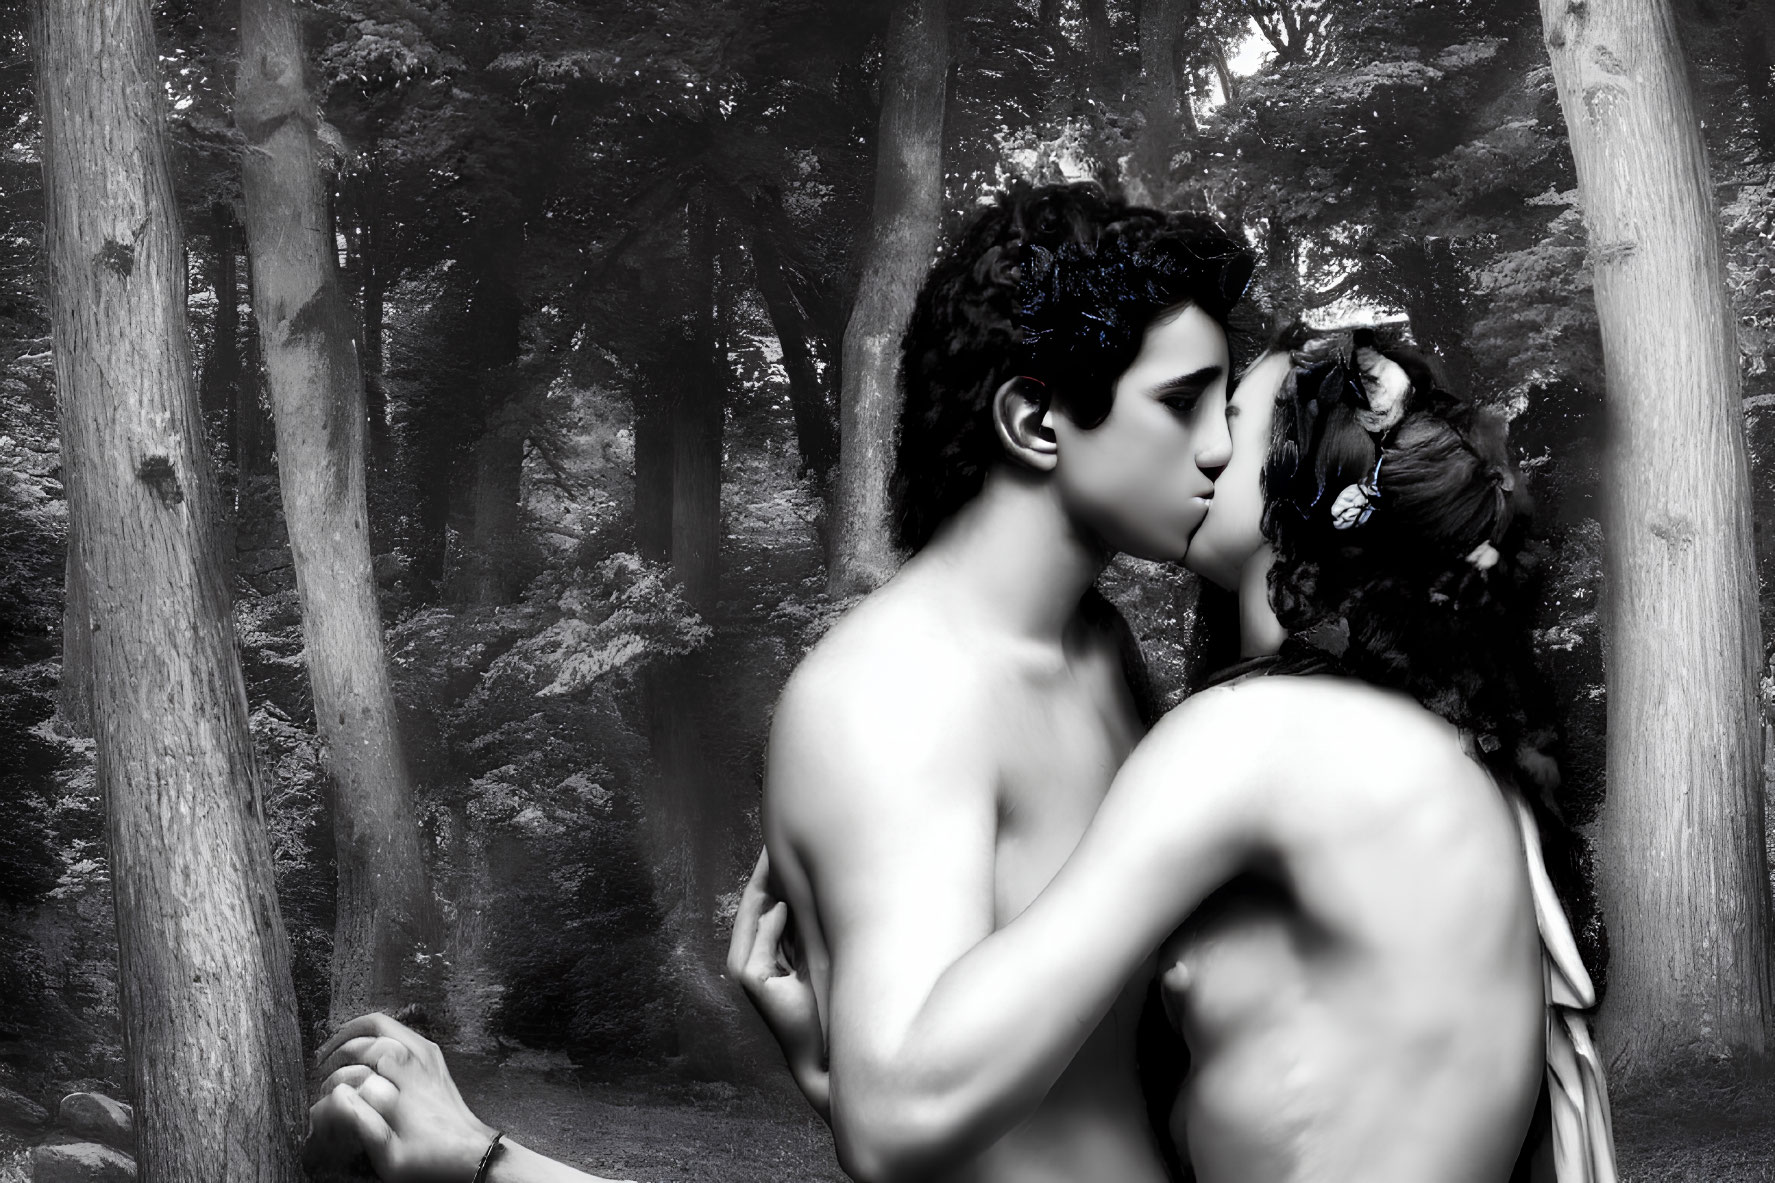 Monochrome image of shirtless man and woman embracing in misty forest